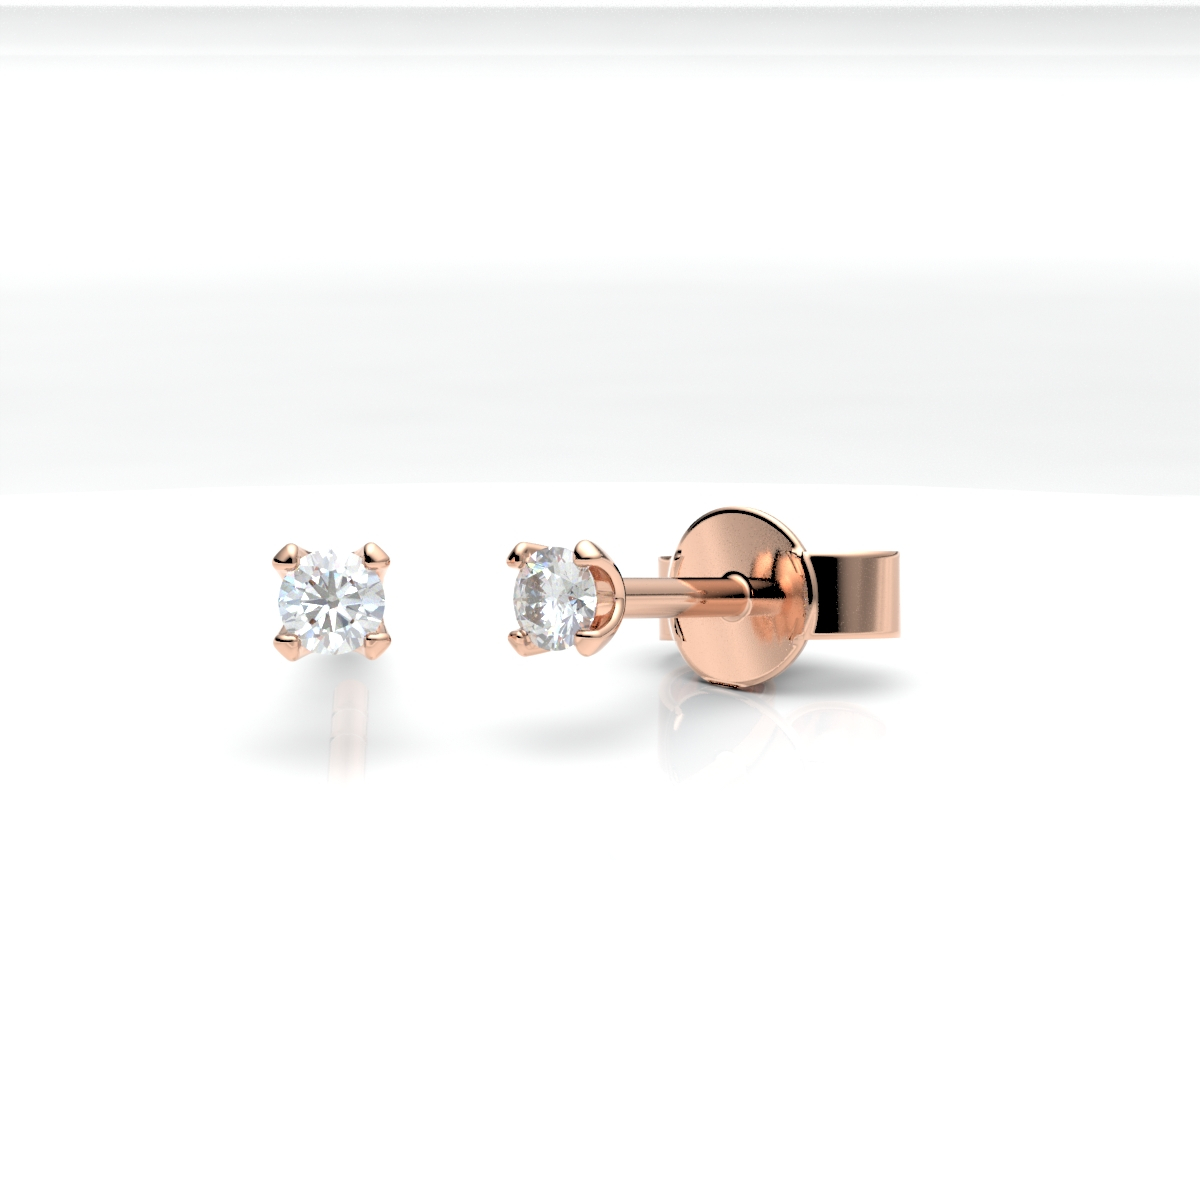 012502-5H24-001 | Ohrstecker Aalen 012502 585 Roségold Brillant 0,100 ct H-SI ∅ 2.4mm100% Made in Germany  